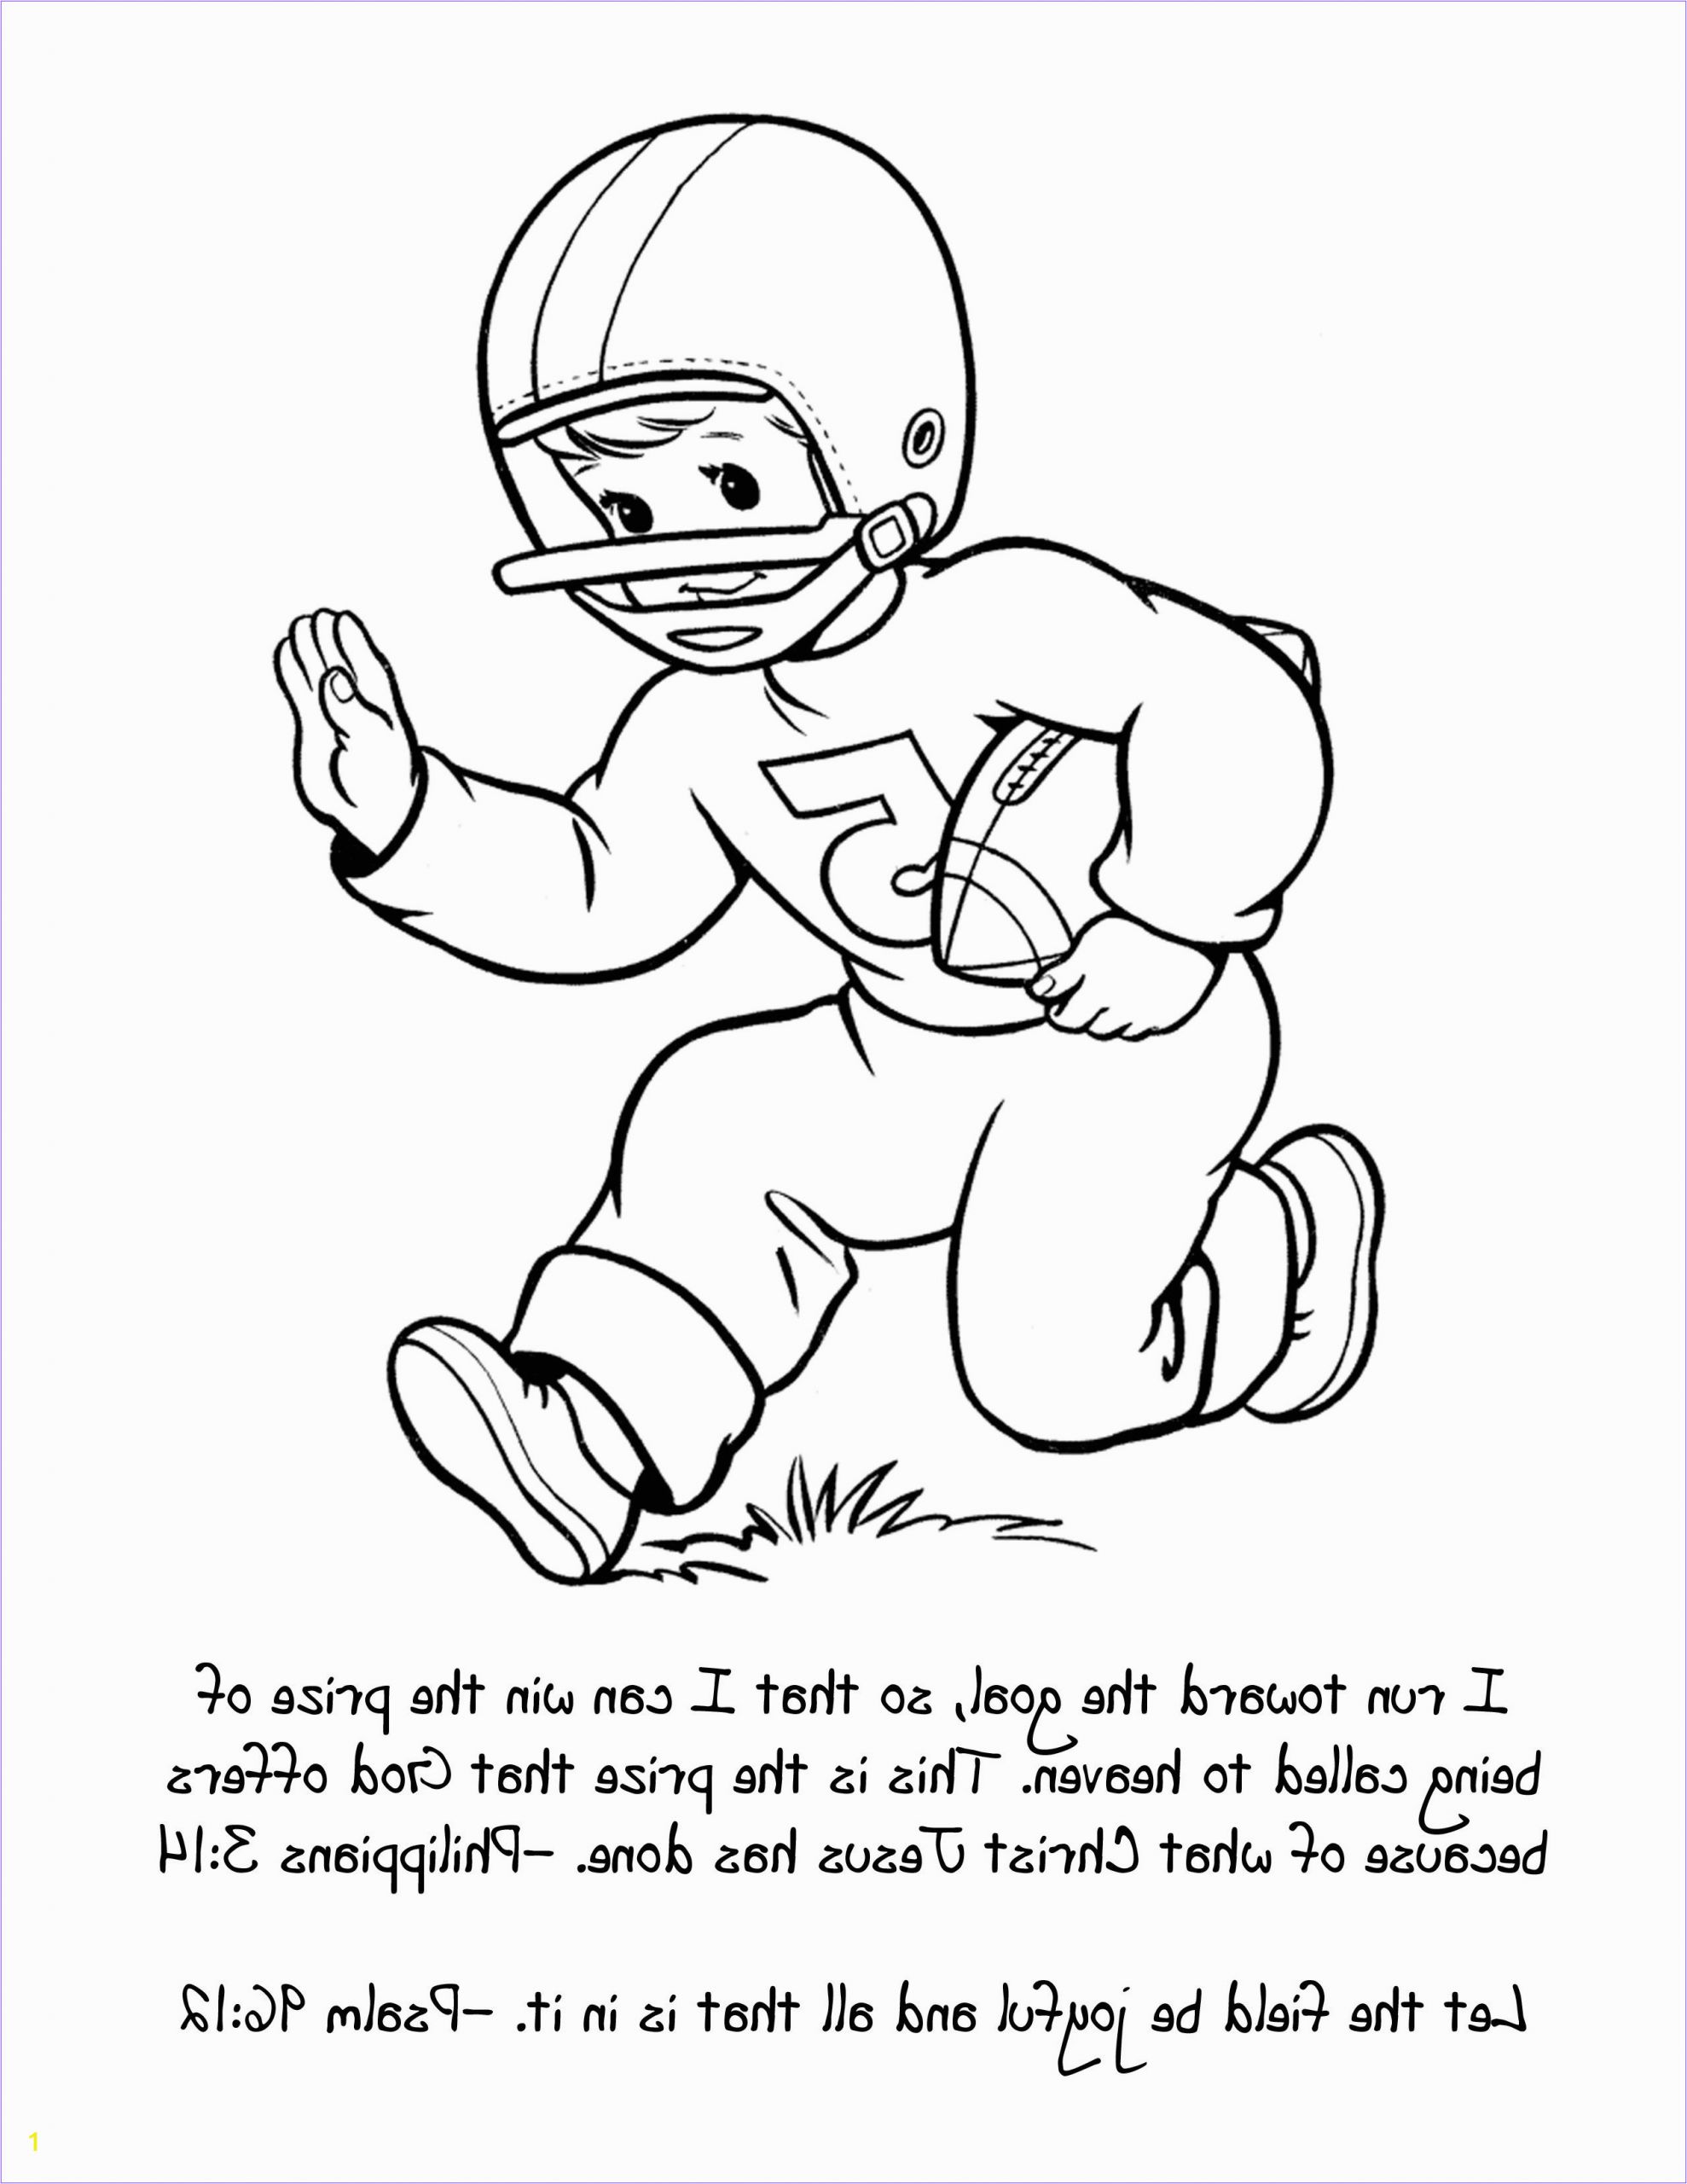 Sunday School Thanksgiving Coloring Pages Coloring Sunday School Coloring Pages Free Sheets